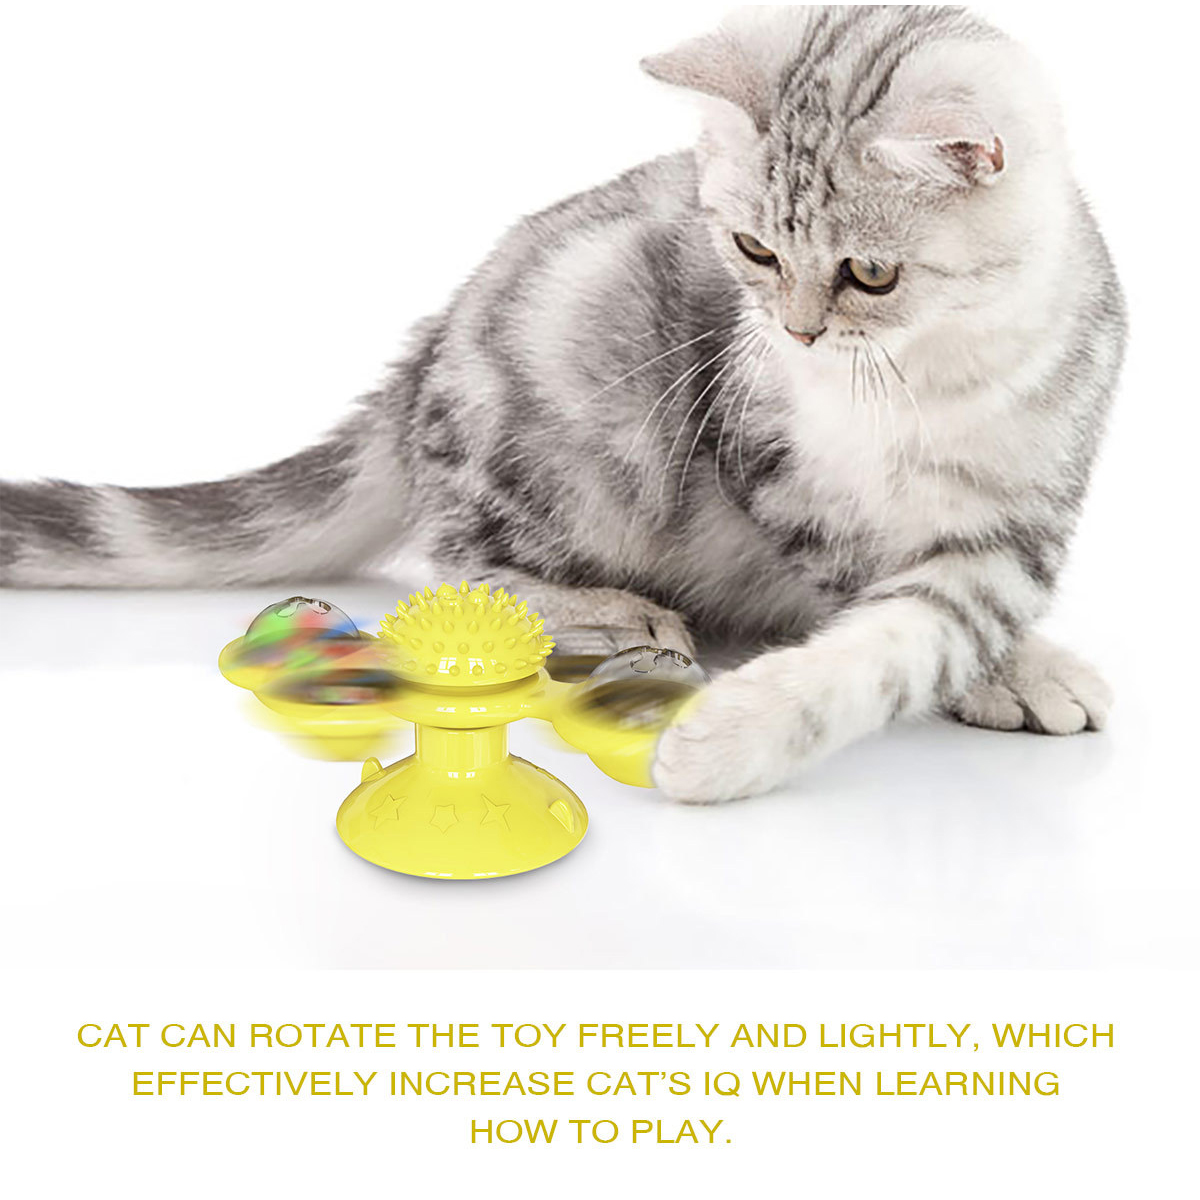 Cat-Funny-Toy-Multifunction-Windmill-Turntable-Massage-Tickle-Toy-Hair-Brush-Pet-Interactive-Game-wi-1865369-9